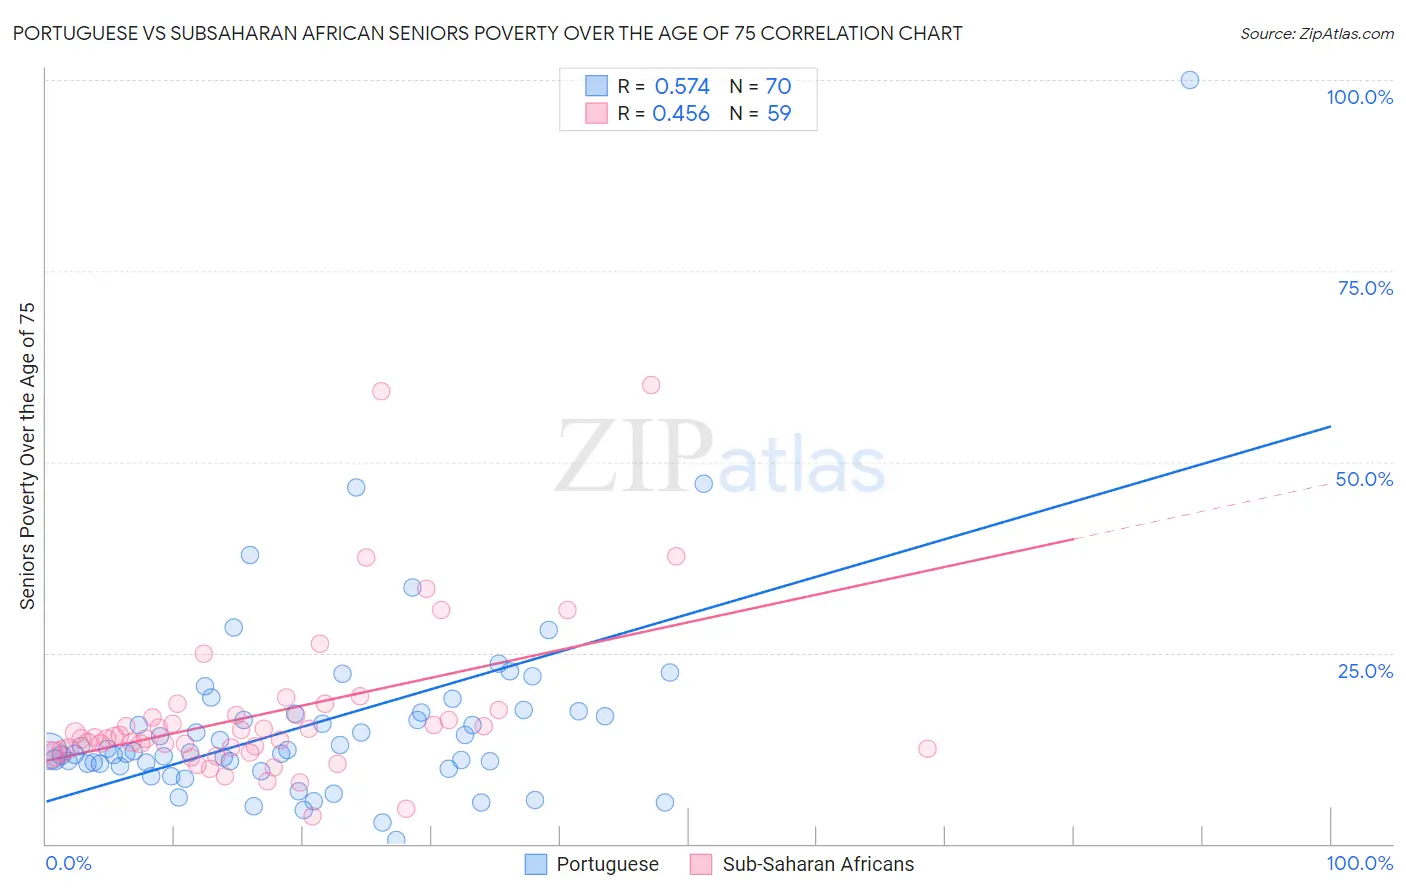 Portuguese vs Subsaharan African Seniors Poverty Over the Age of 75